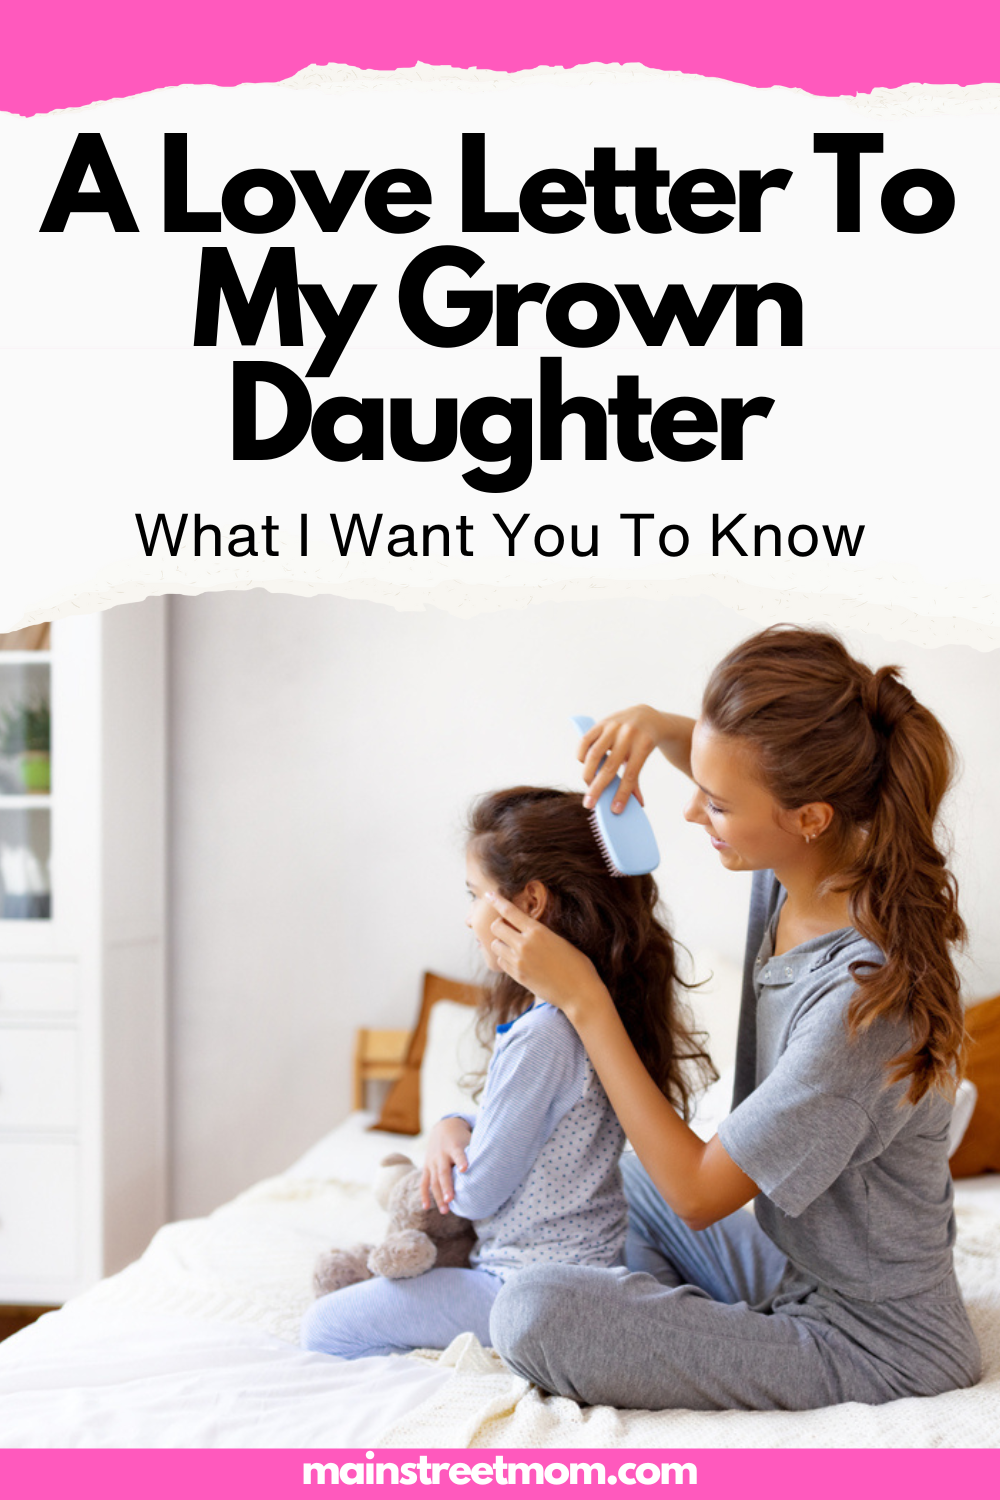 A Love Letter To My Grown Daughter: What I Want You To Know